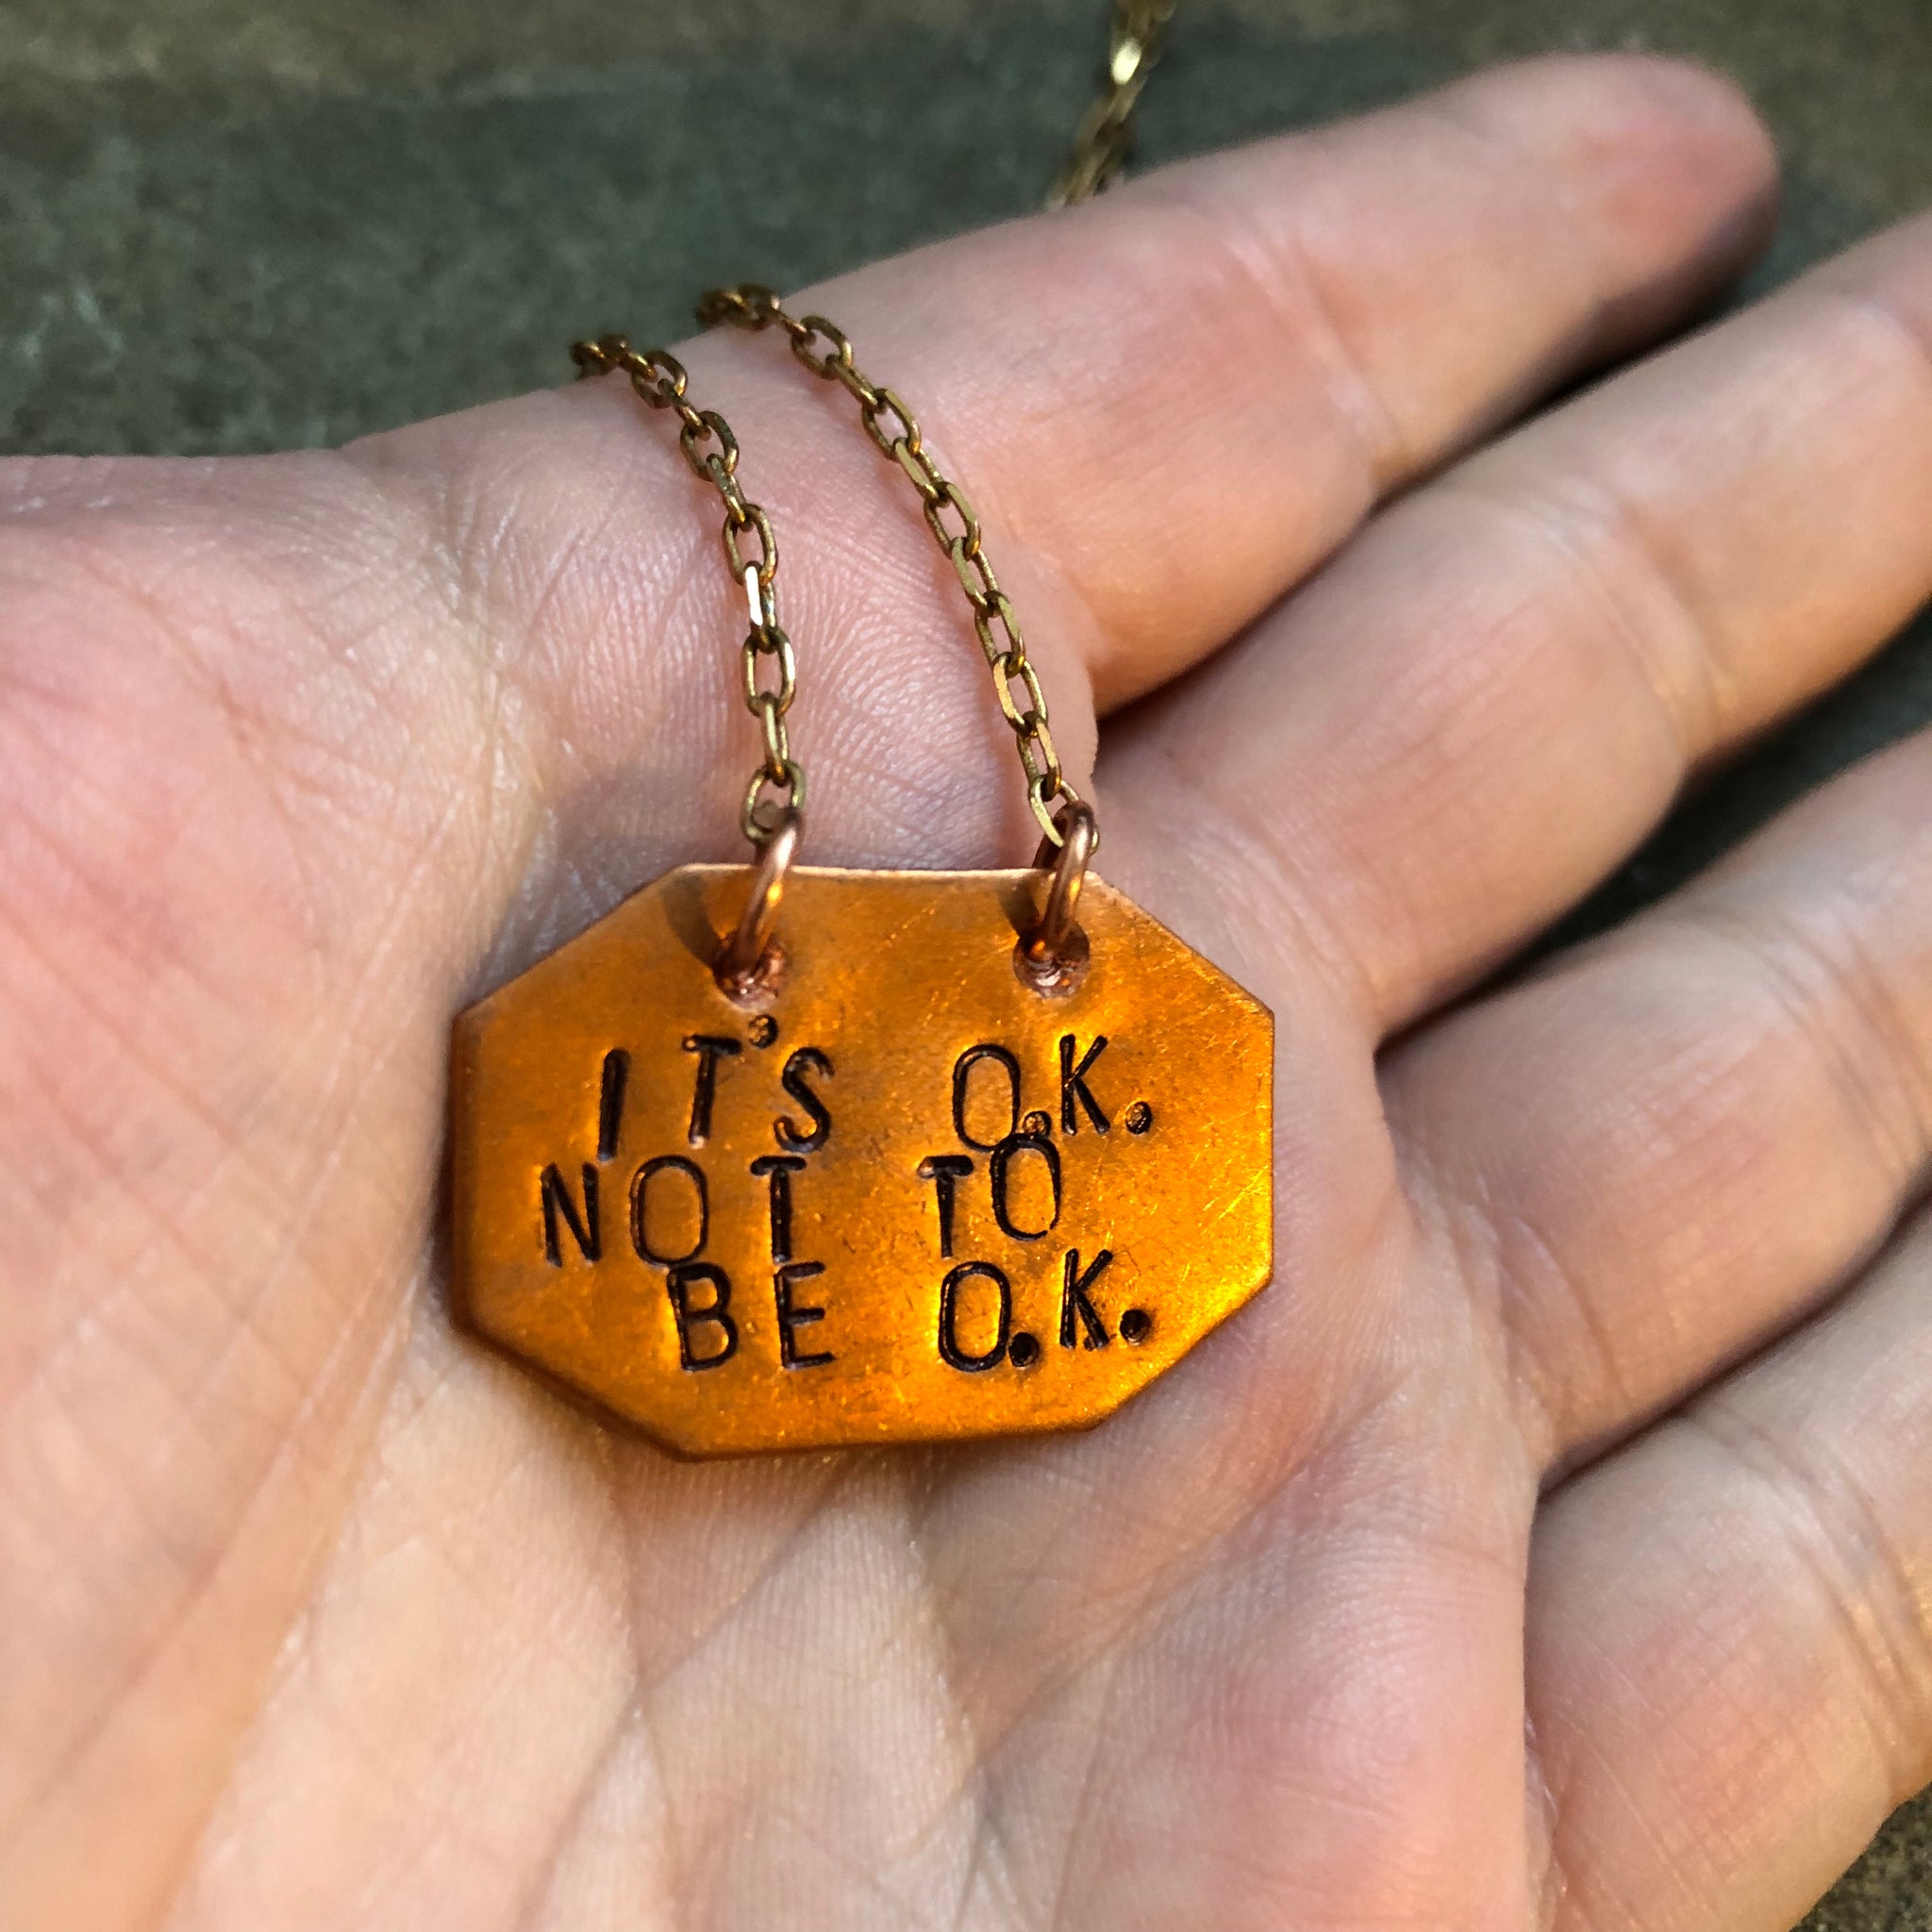 "It's ok, not to be ok" mantra necklace